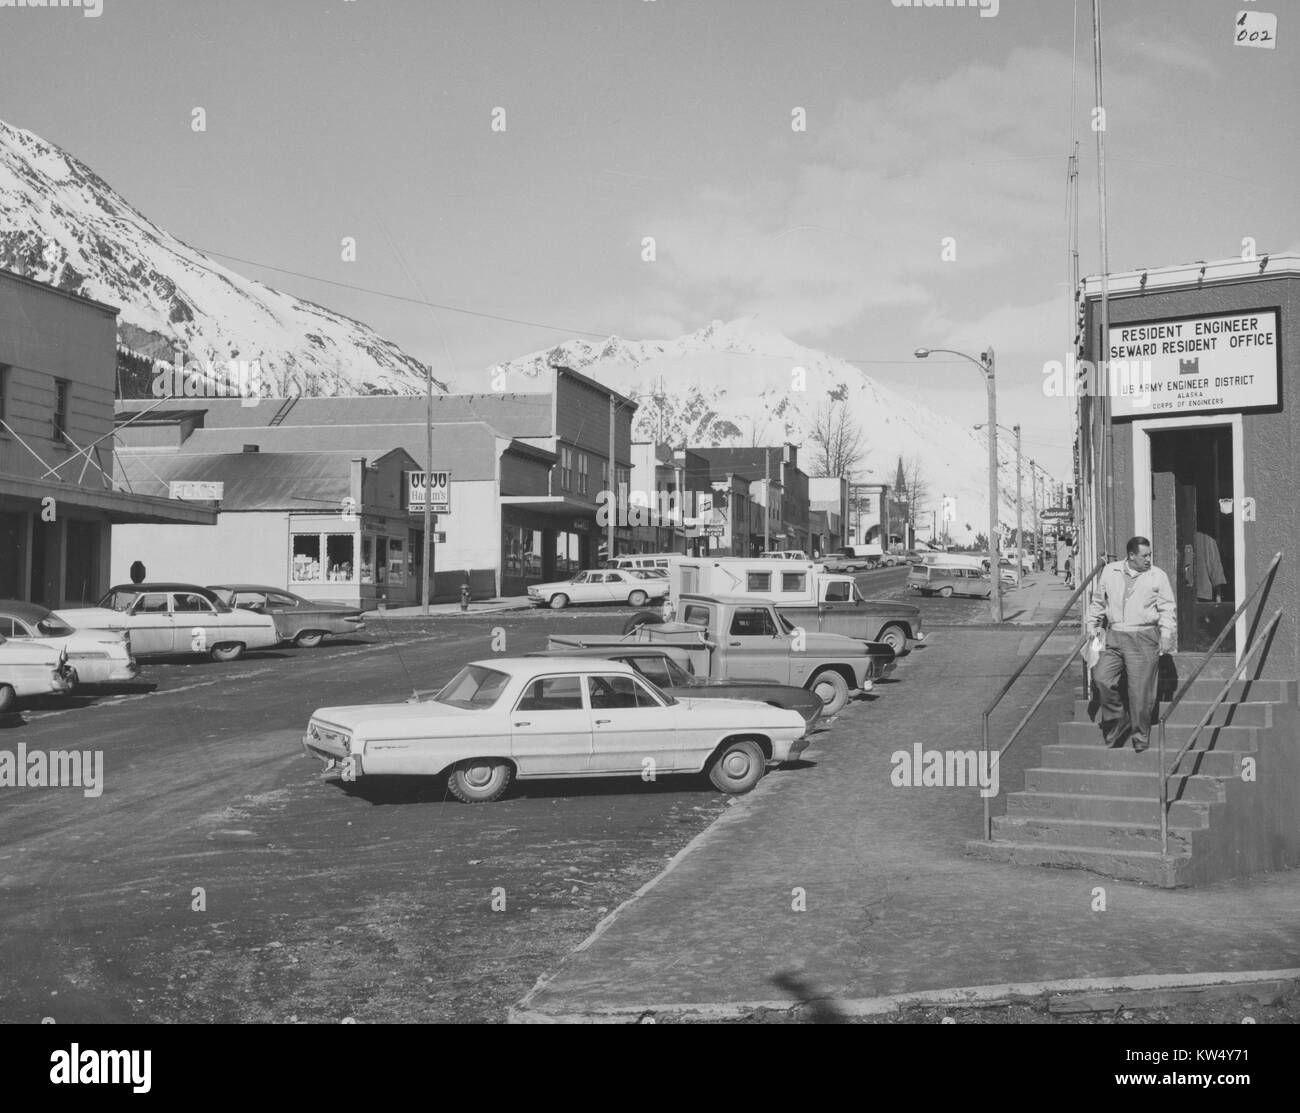 View down a fairly busy street with commercial buildings in Seward, Alaska, 1964. Stock Photo